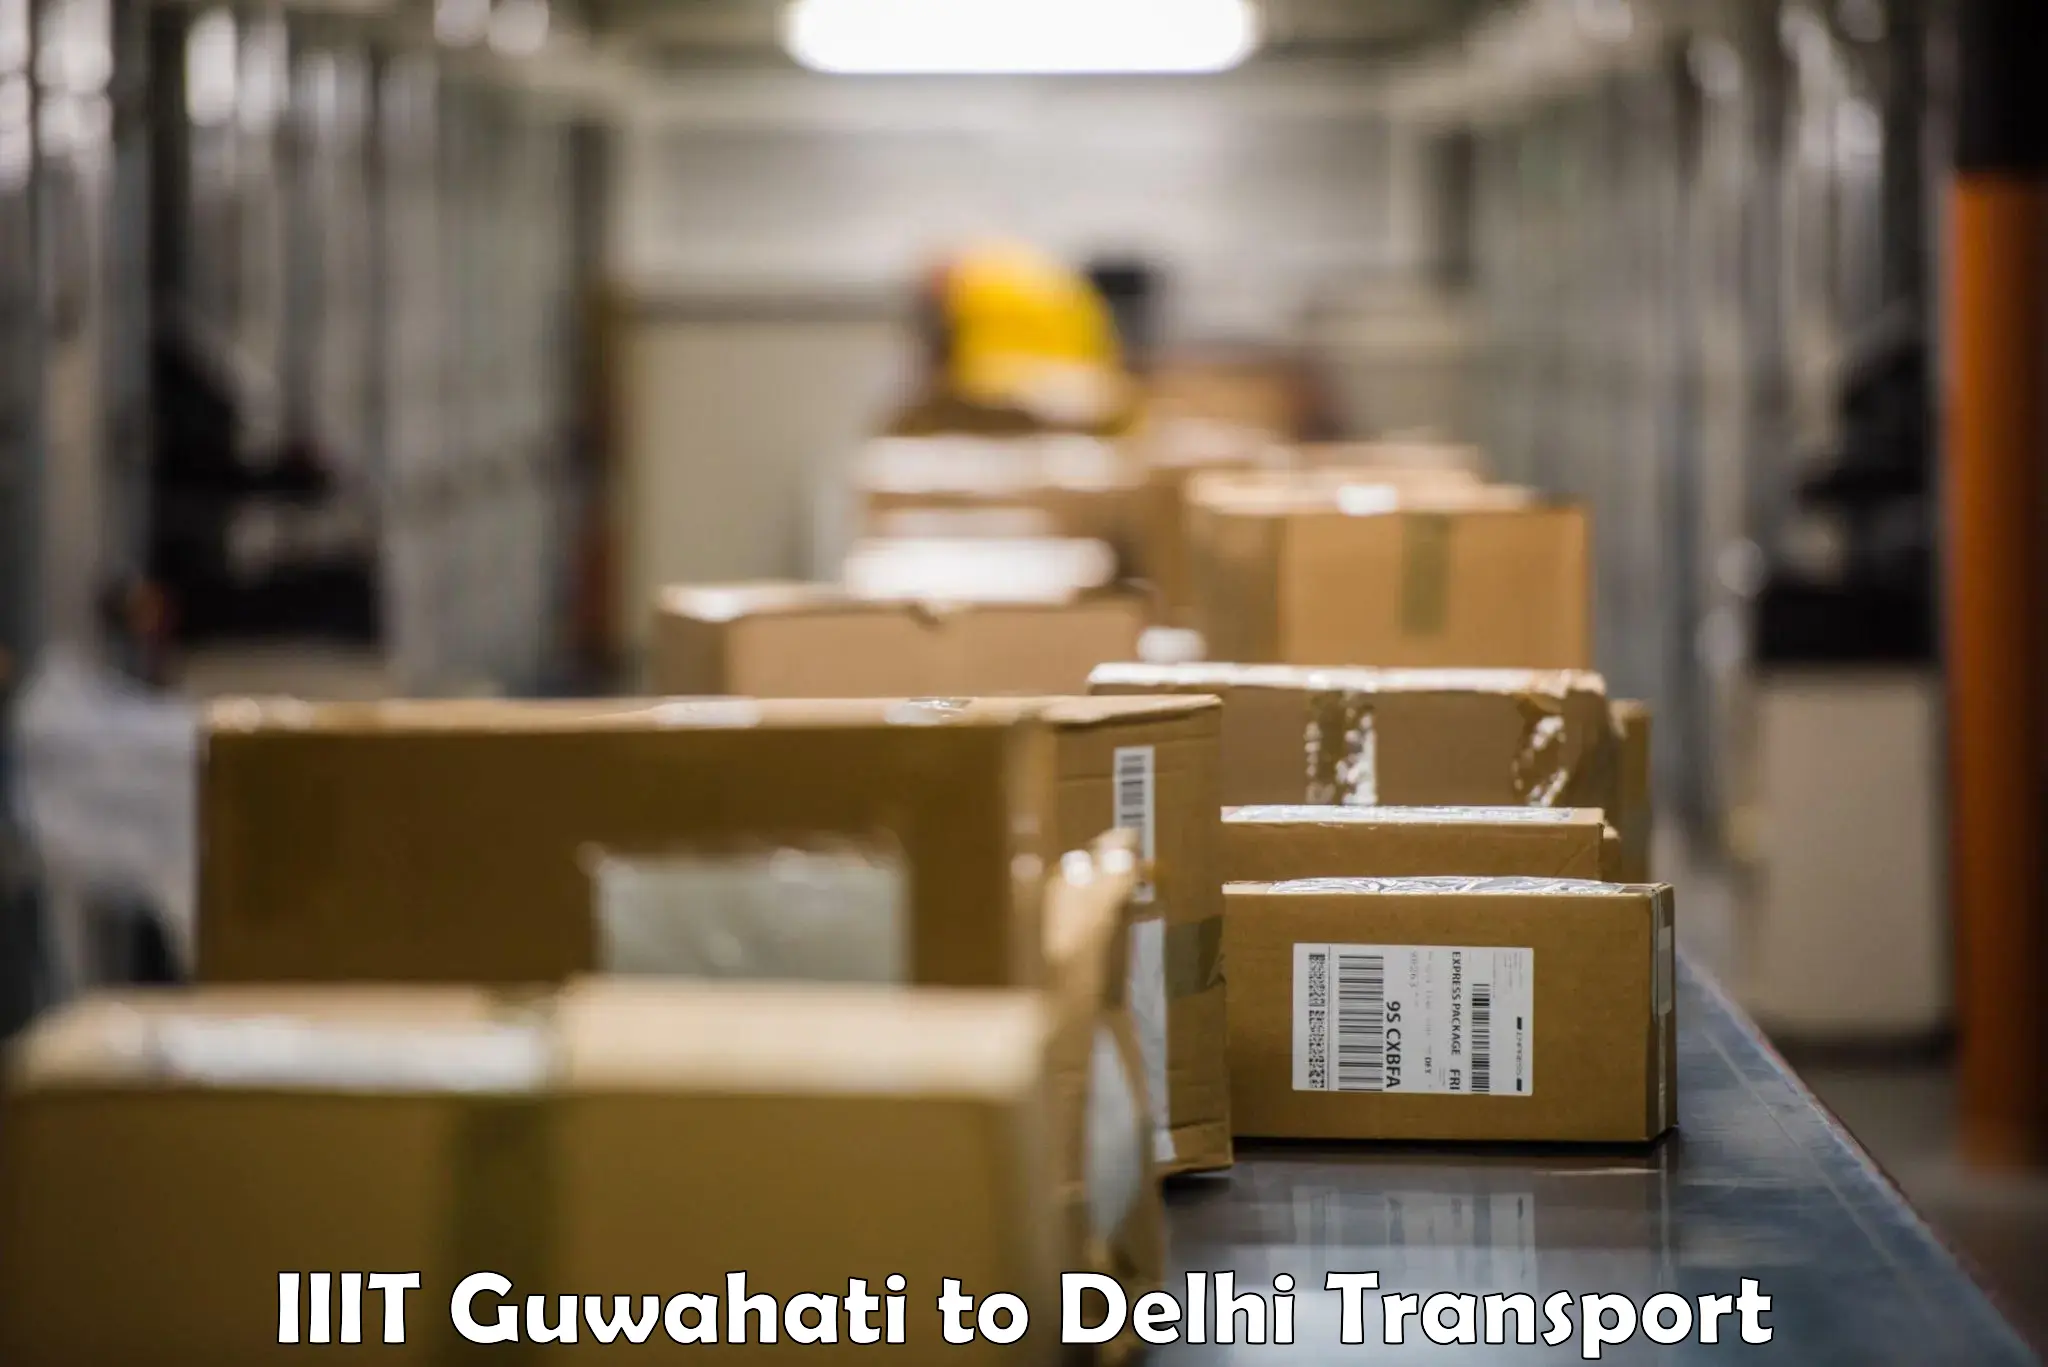 All India transport service IIIT Guwahati to NCR